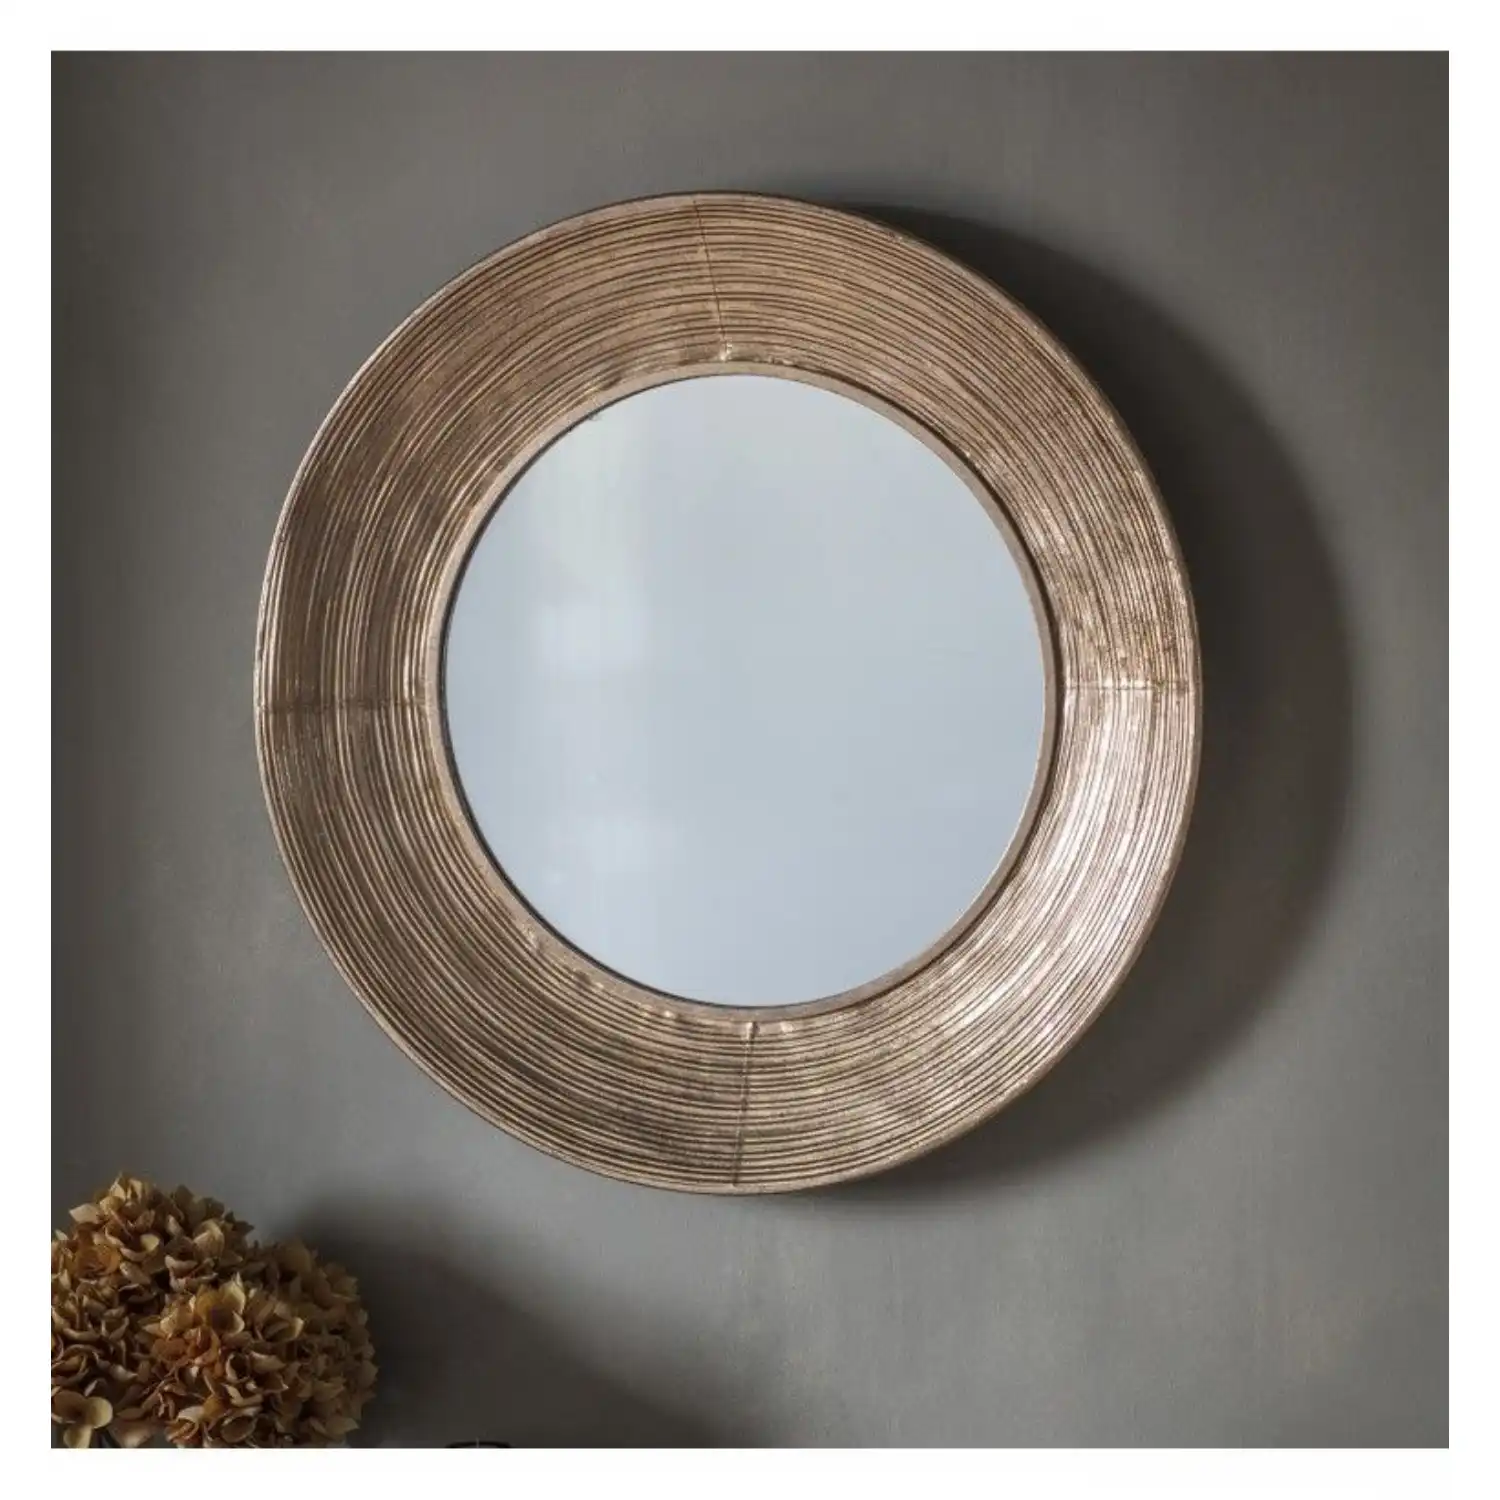 Gallery Knowle Champagne Gold Round Wall Mirror 72cm Diameter